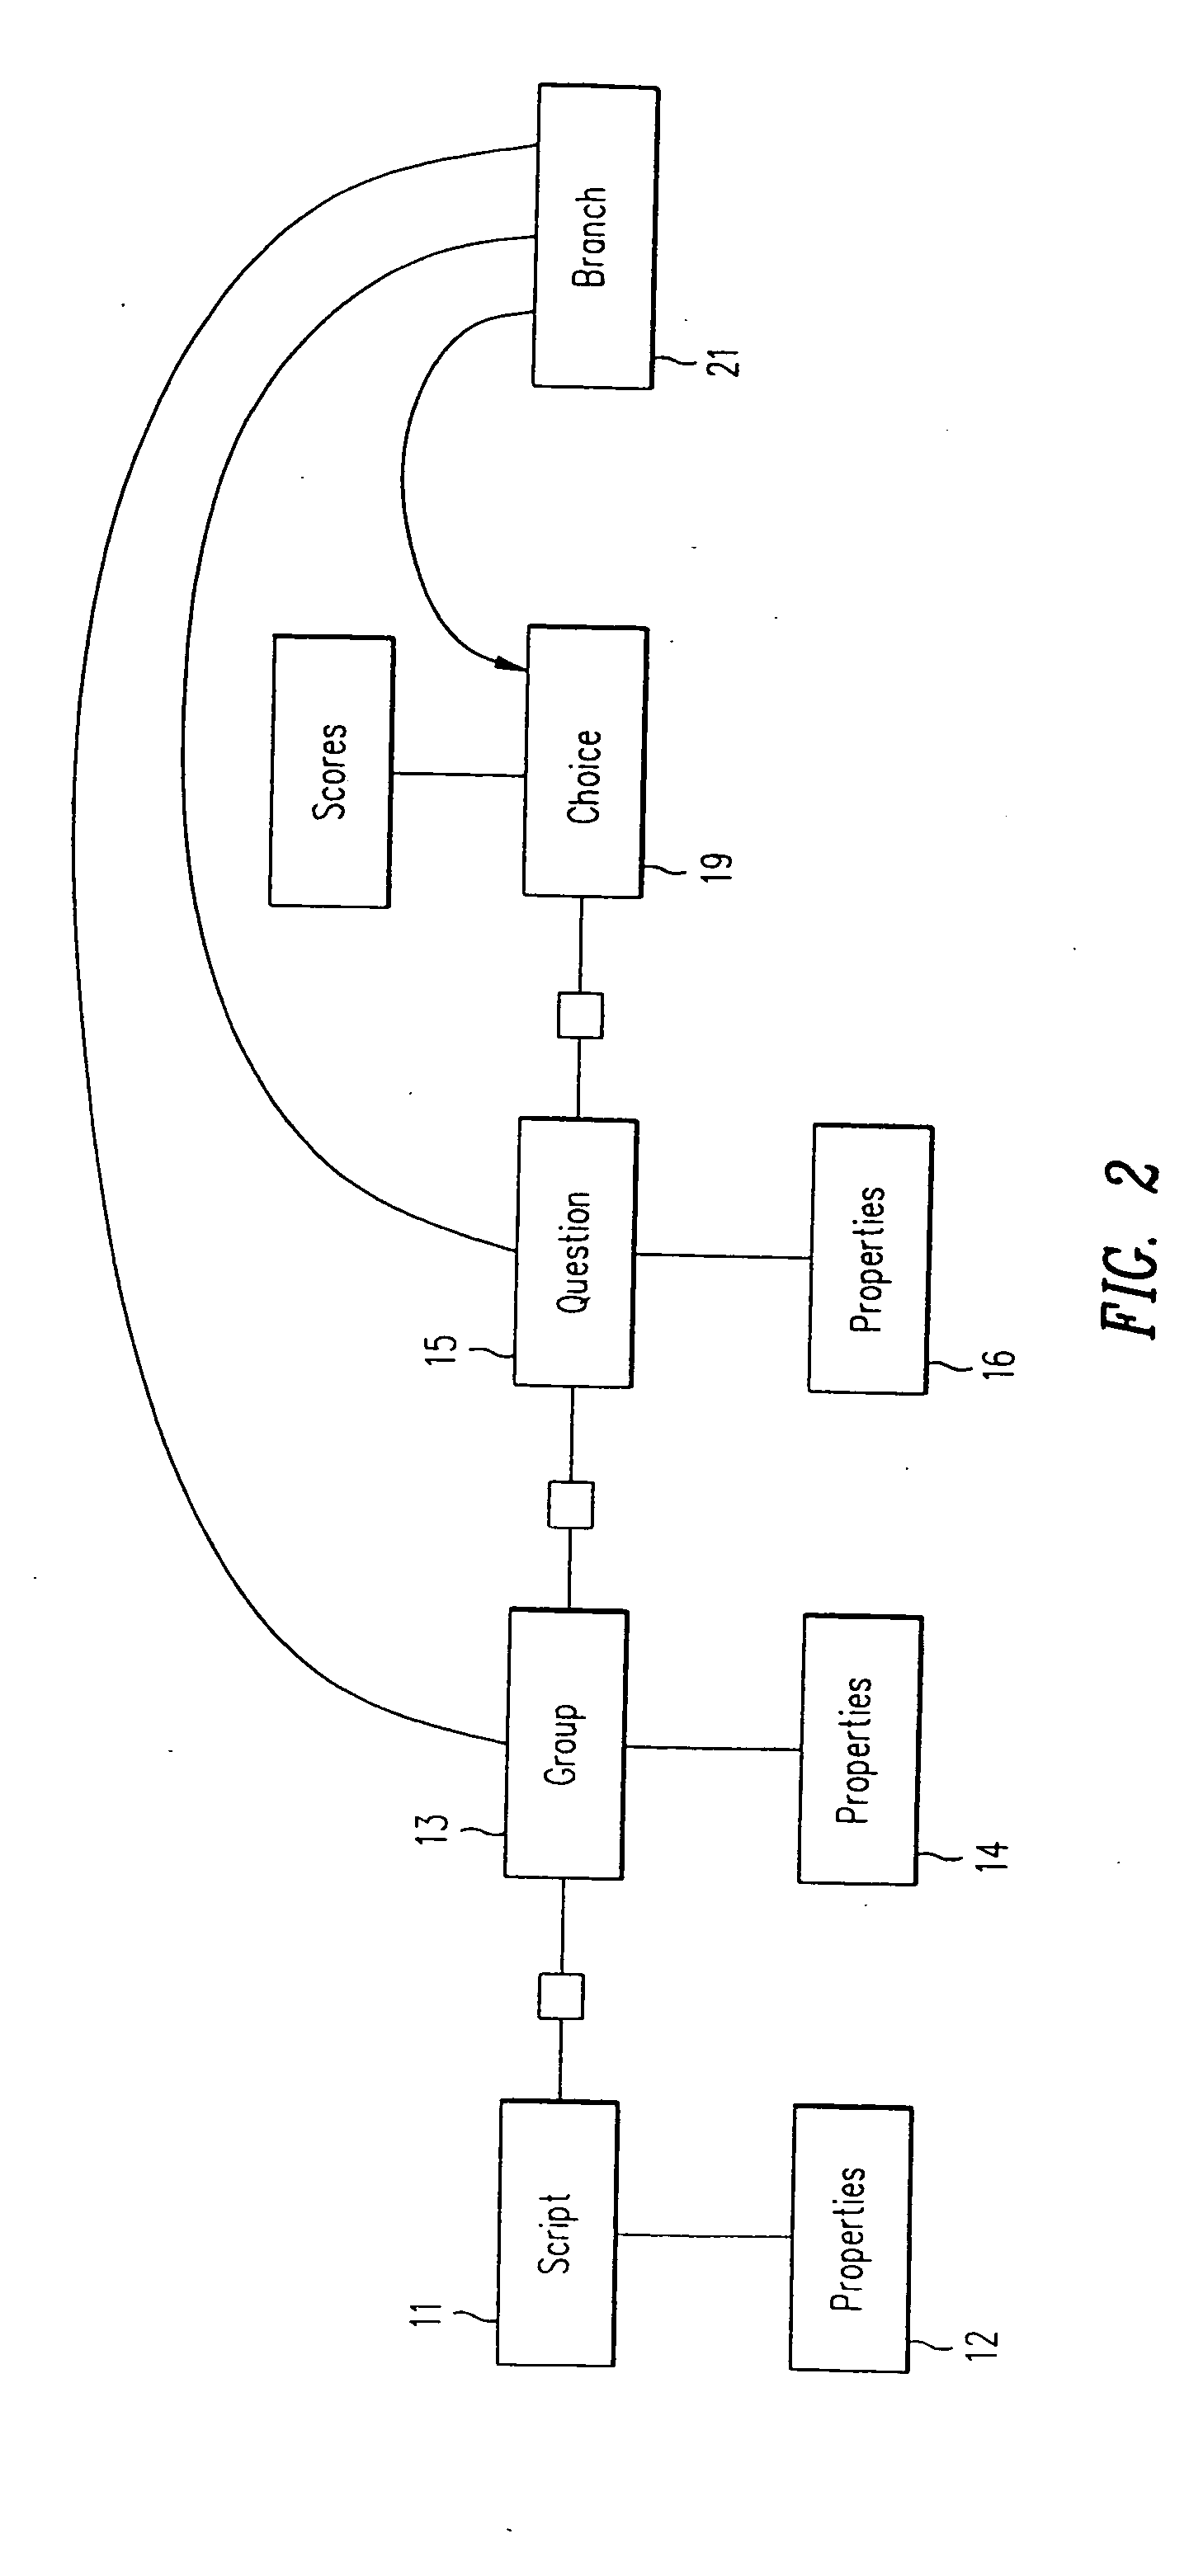 System and method for smart scripting call centers and configuration thereof